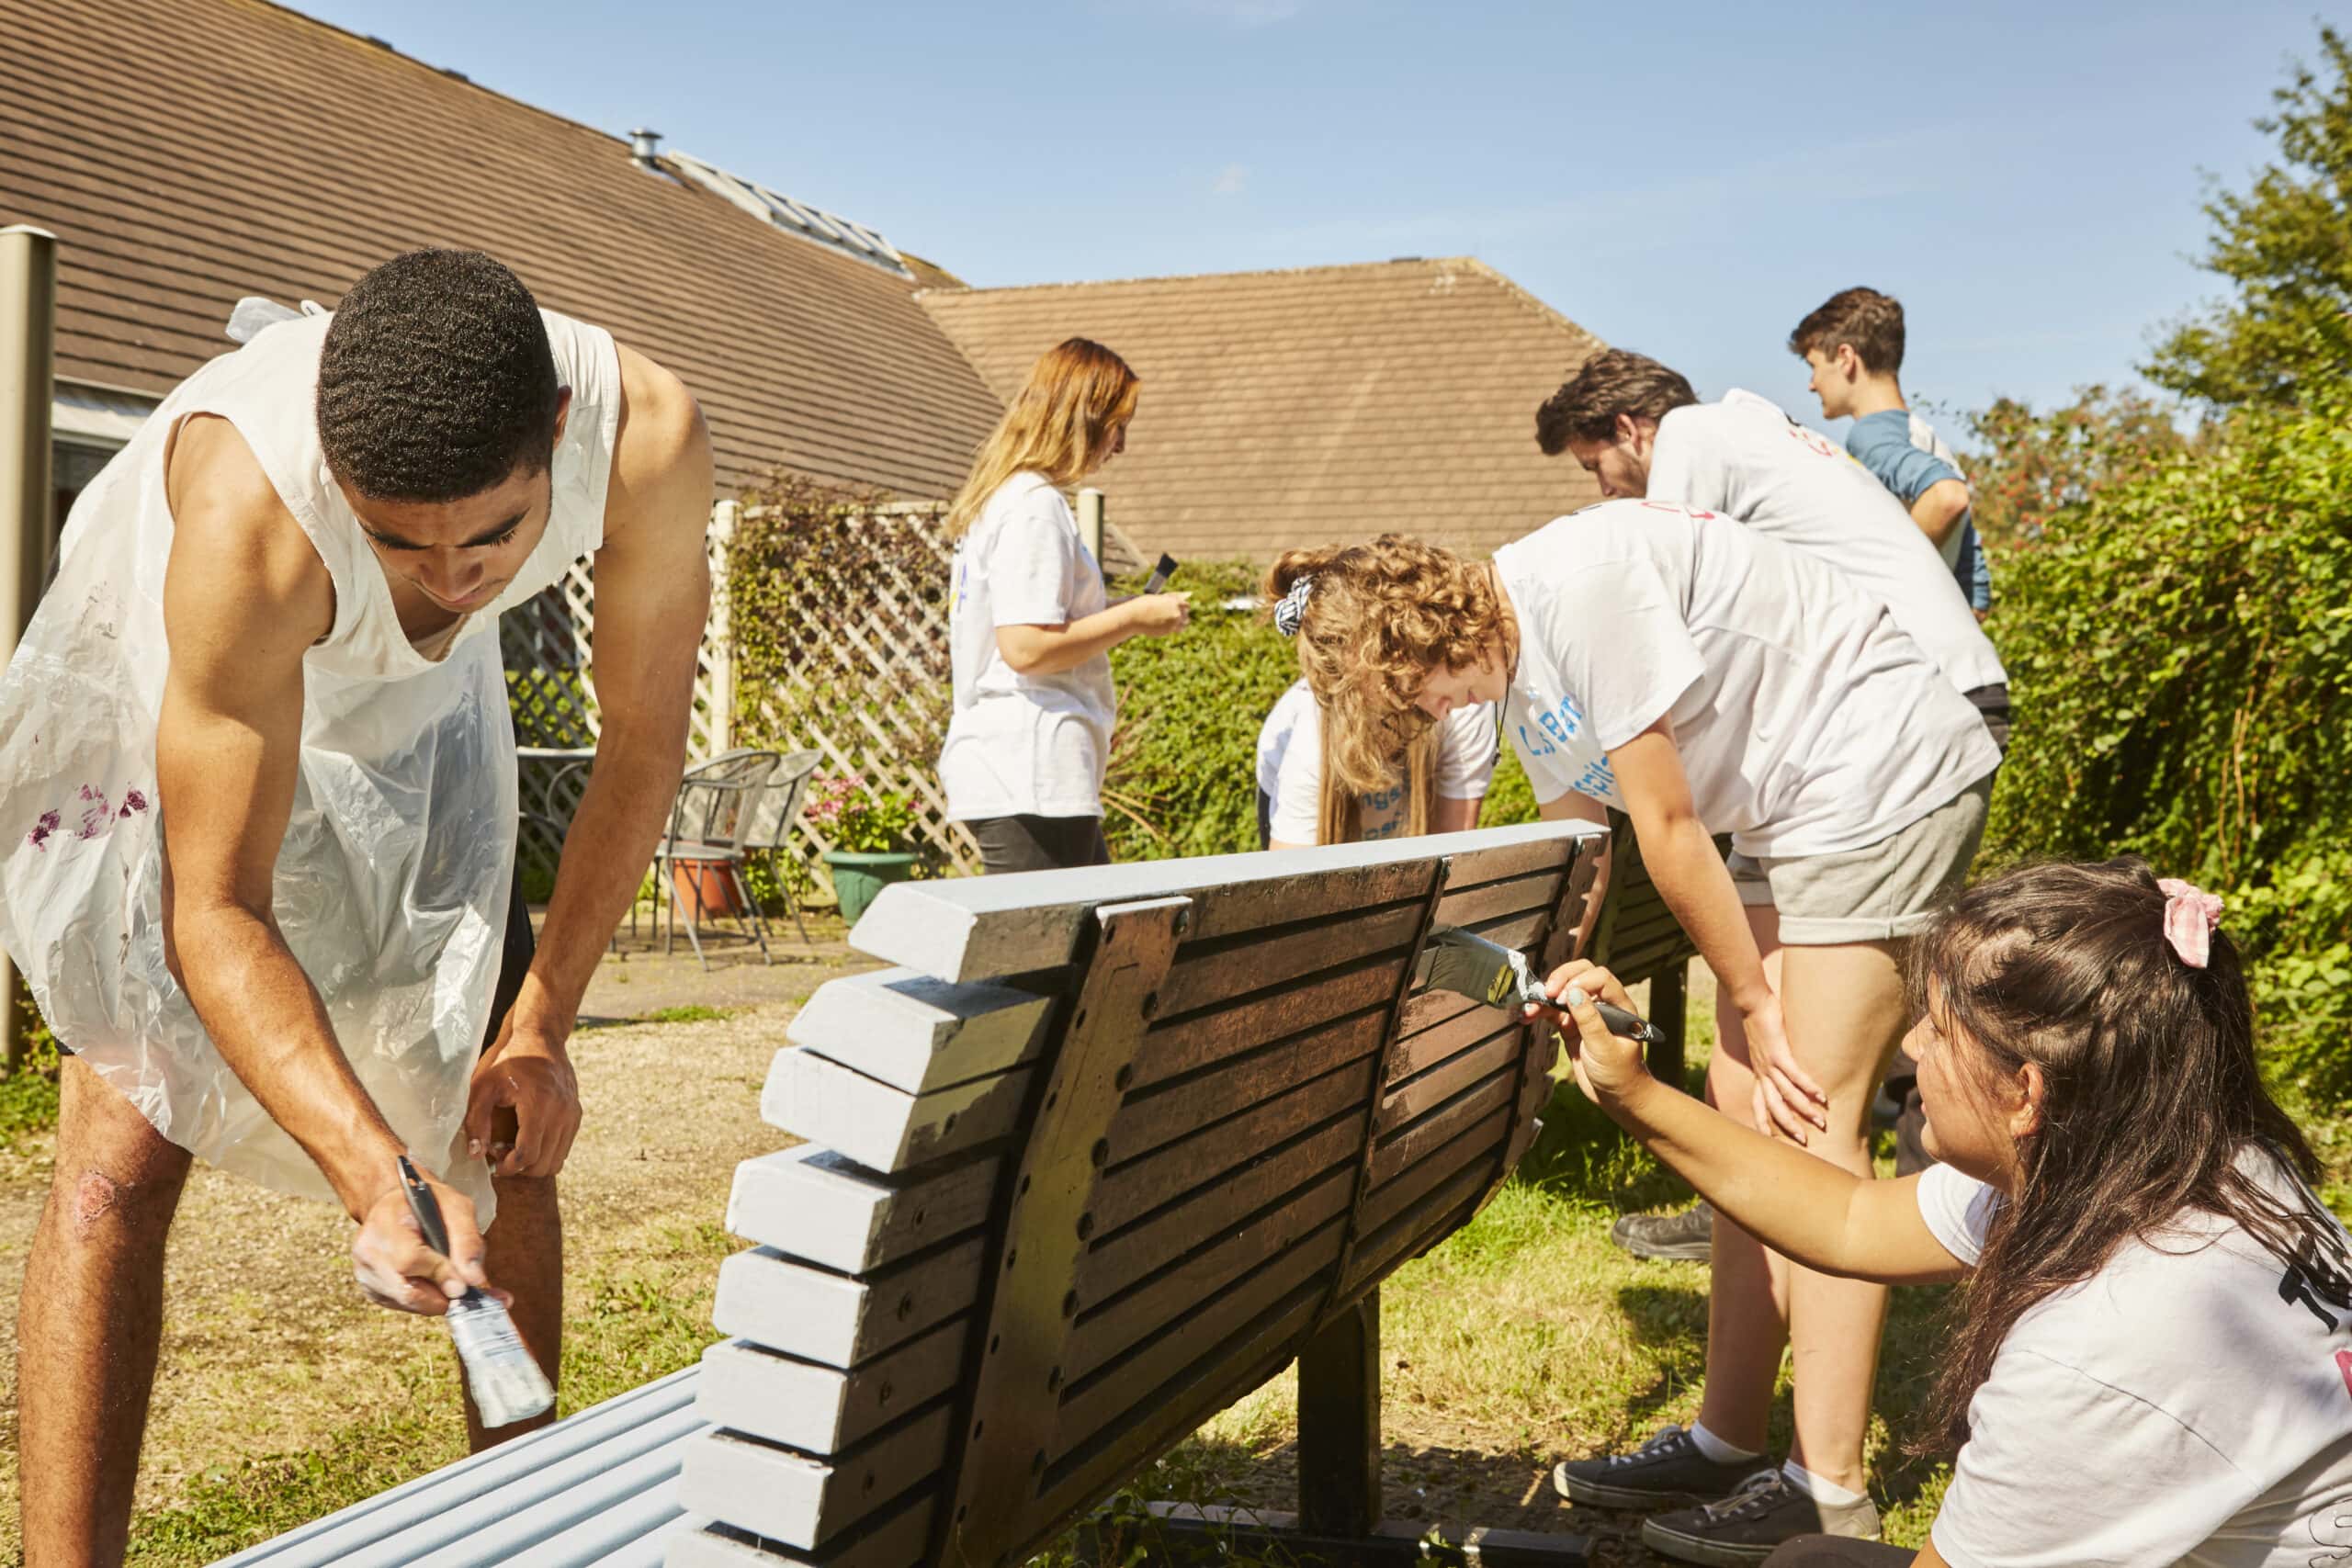 A group of young people work together to refurbish and paint a bench in their local community.